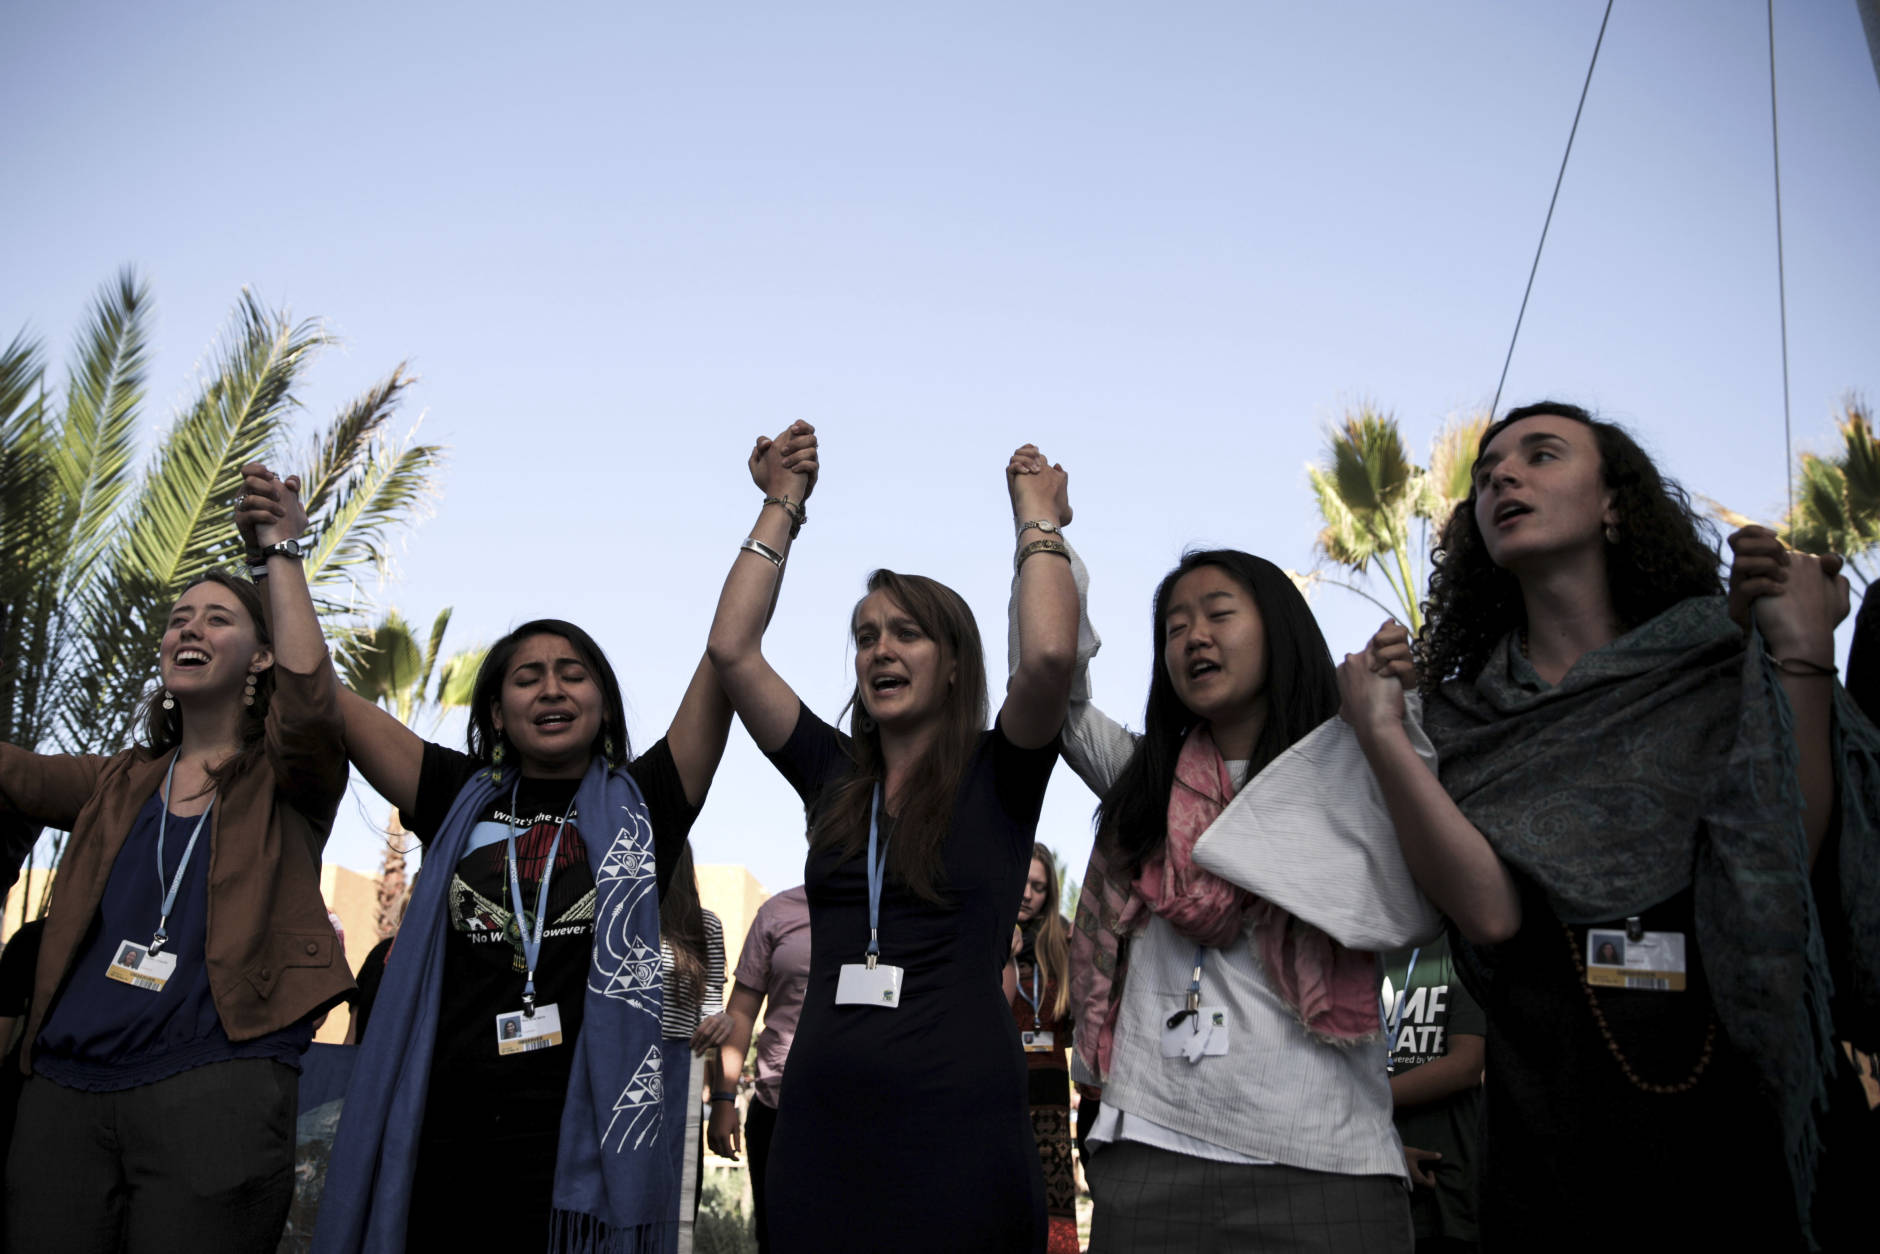 Environmental activists stage a protest against President-elect Donald Trump at the Climate Conference, known as COP22, in Marrakech, Morocco, Wednesday, Nov. 9, 2016. The election of a U.S. president who has called global warming a "hoax" alarmed environmentalists and climate scientists and raised questions about whether America, once again, would pull out of an international climate deal. (AP Photo/Mosa'ab Elshamy)